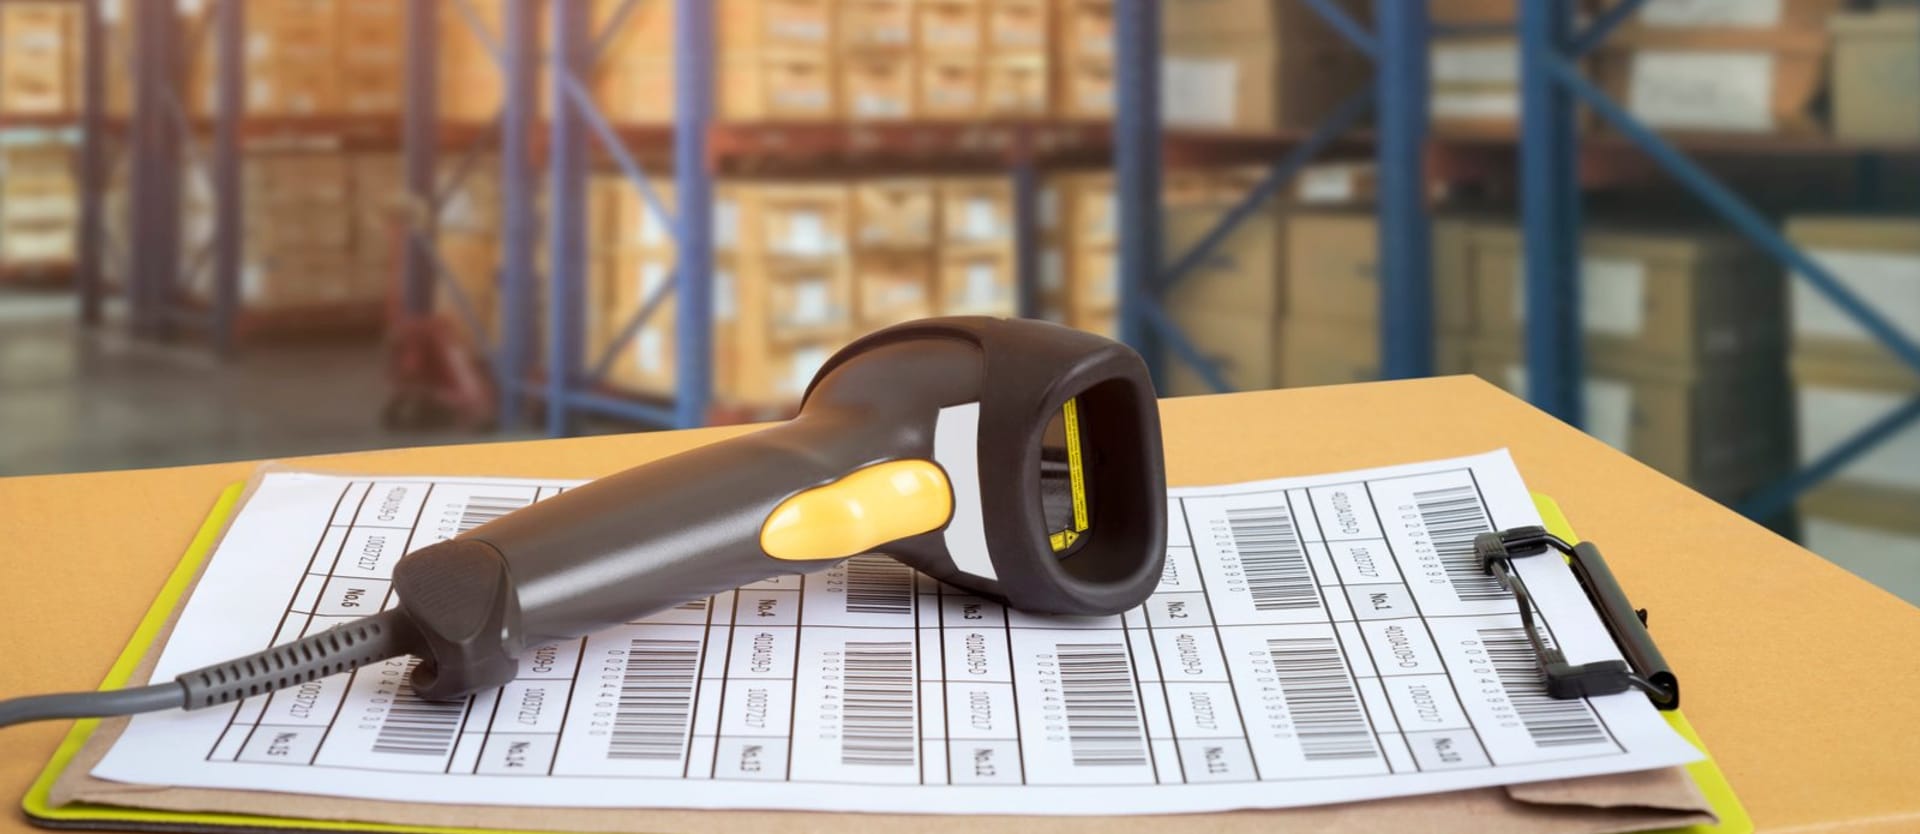 Inventory Management Software: How Technology Addresses Inventory-Related Issues